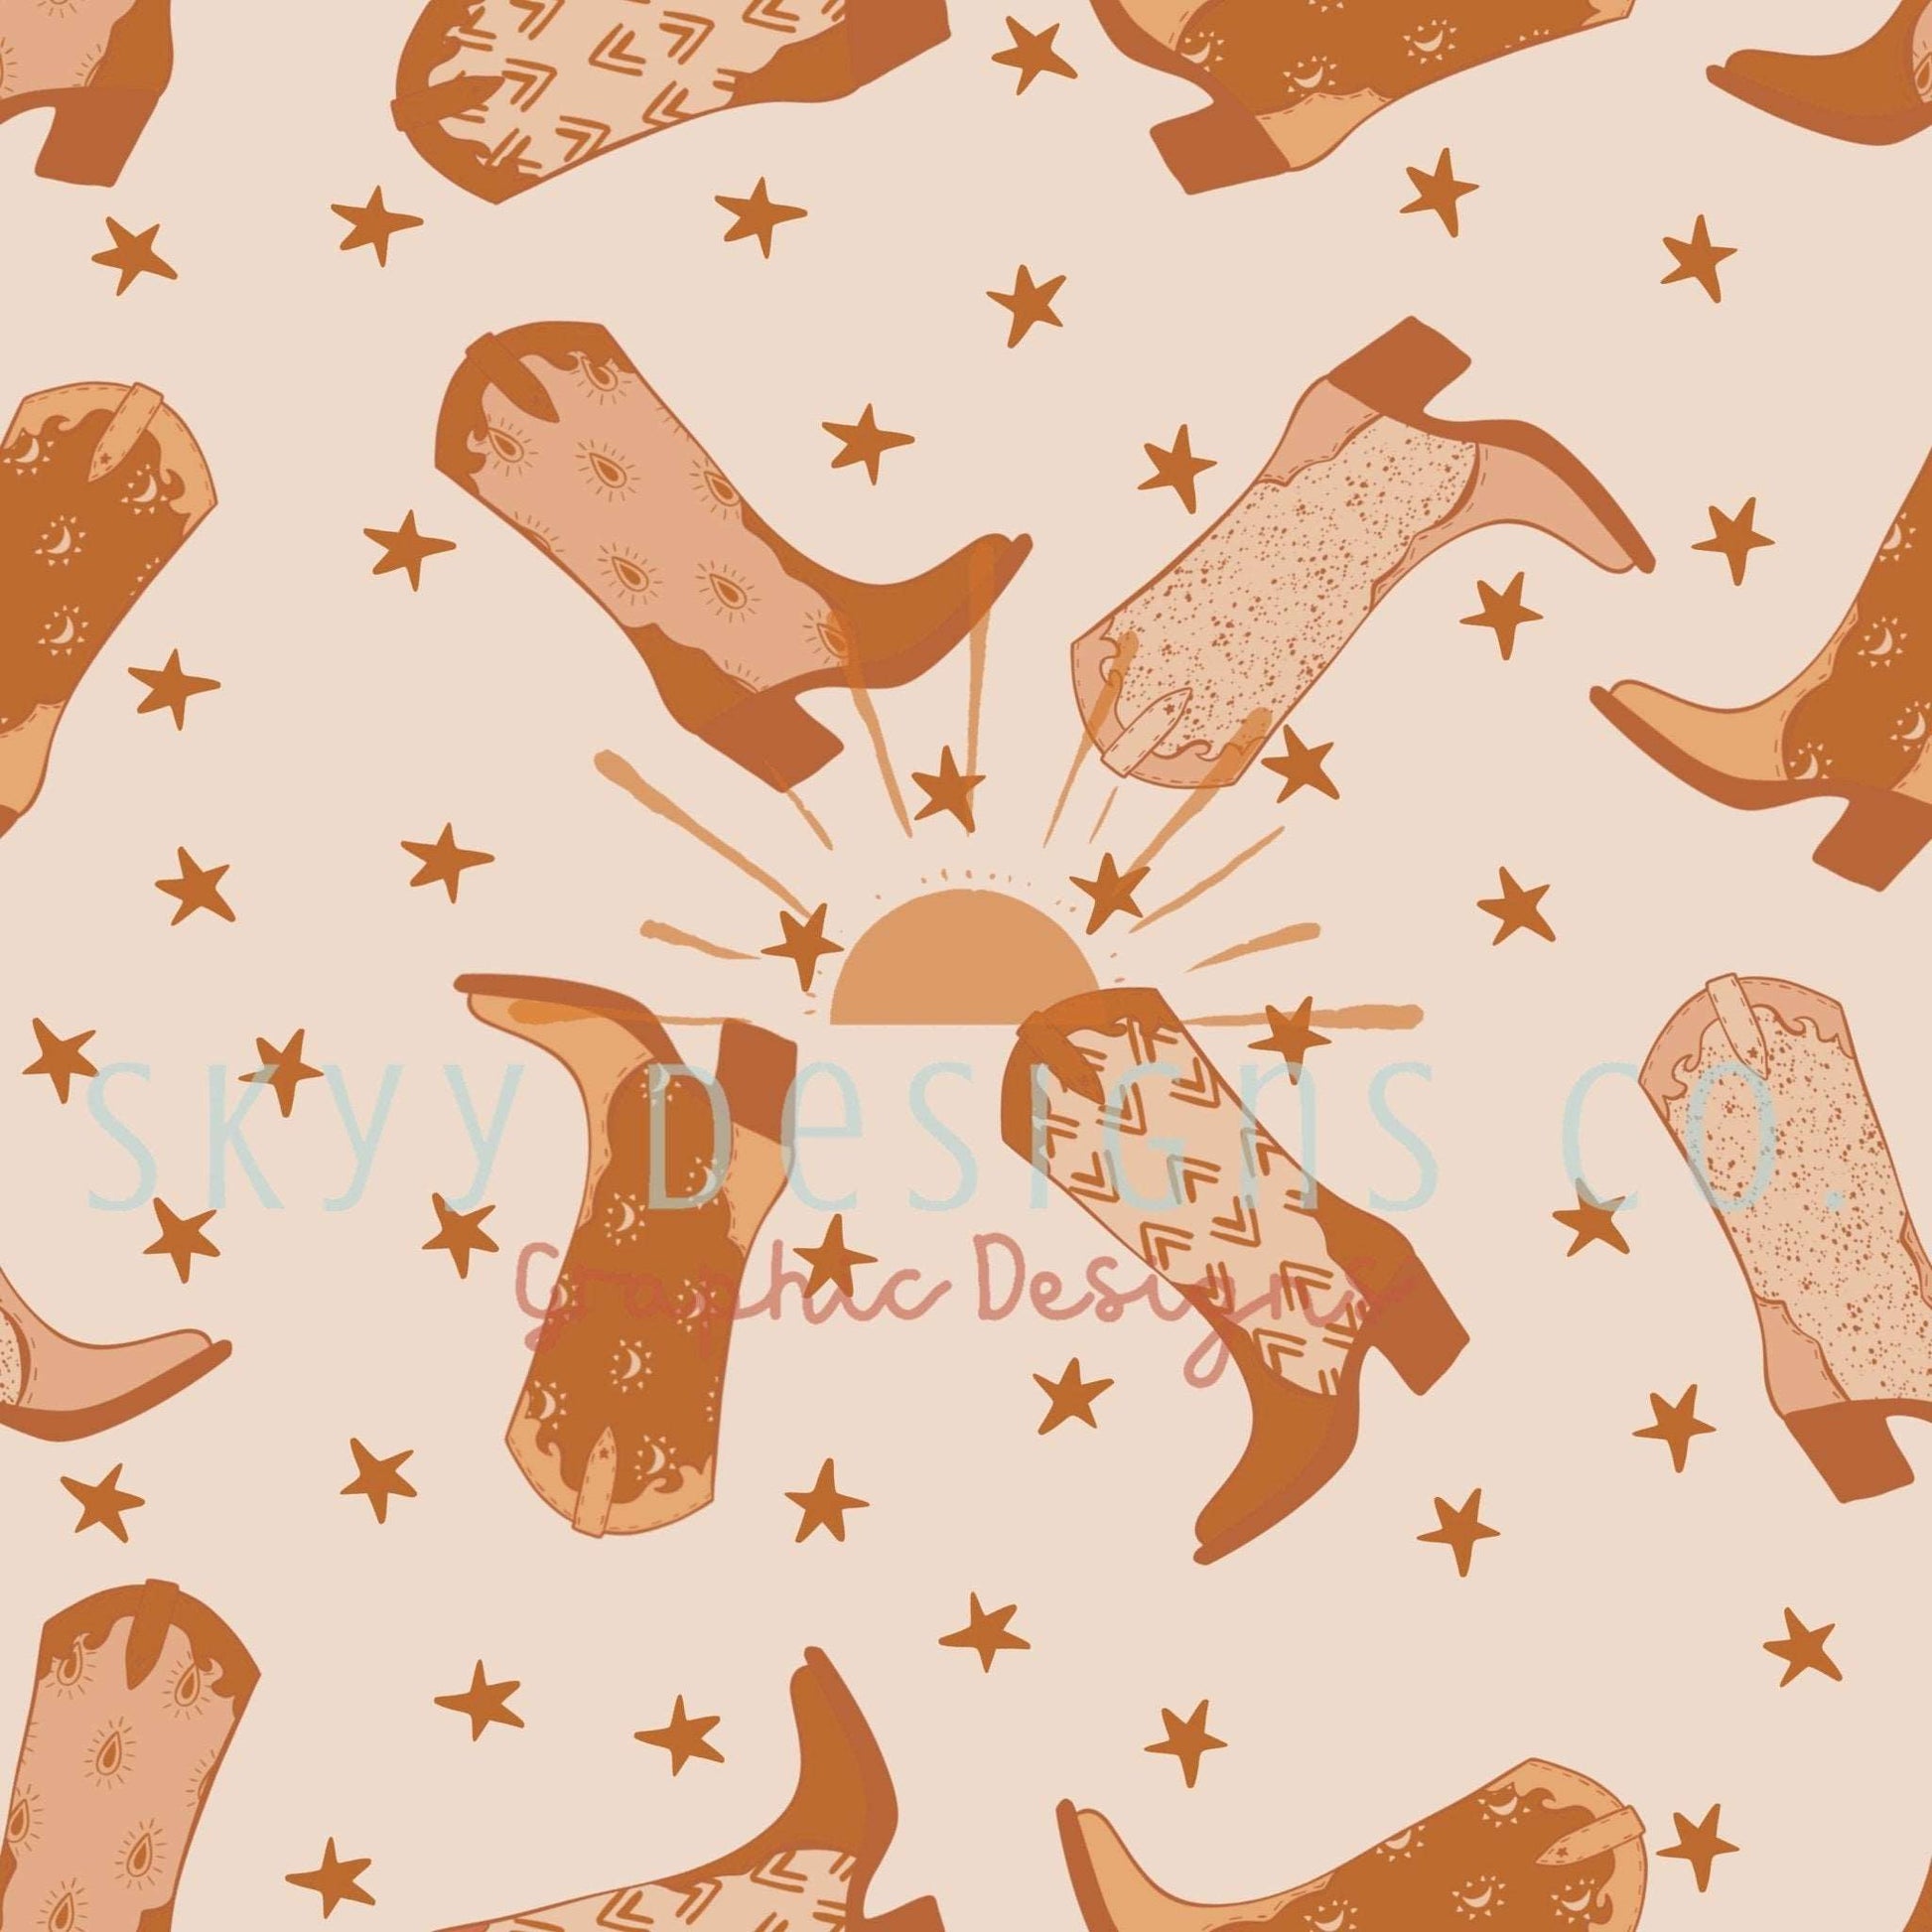 Neutral retro cowboy boots digital seamless pattern for fabrics and wallpapers, retro cowgirl boots digital paper file for fabrics - SkyyDesignsCo